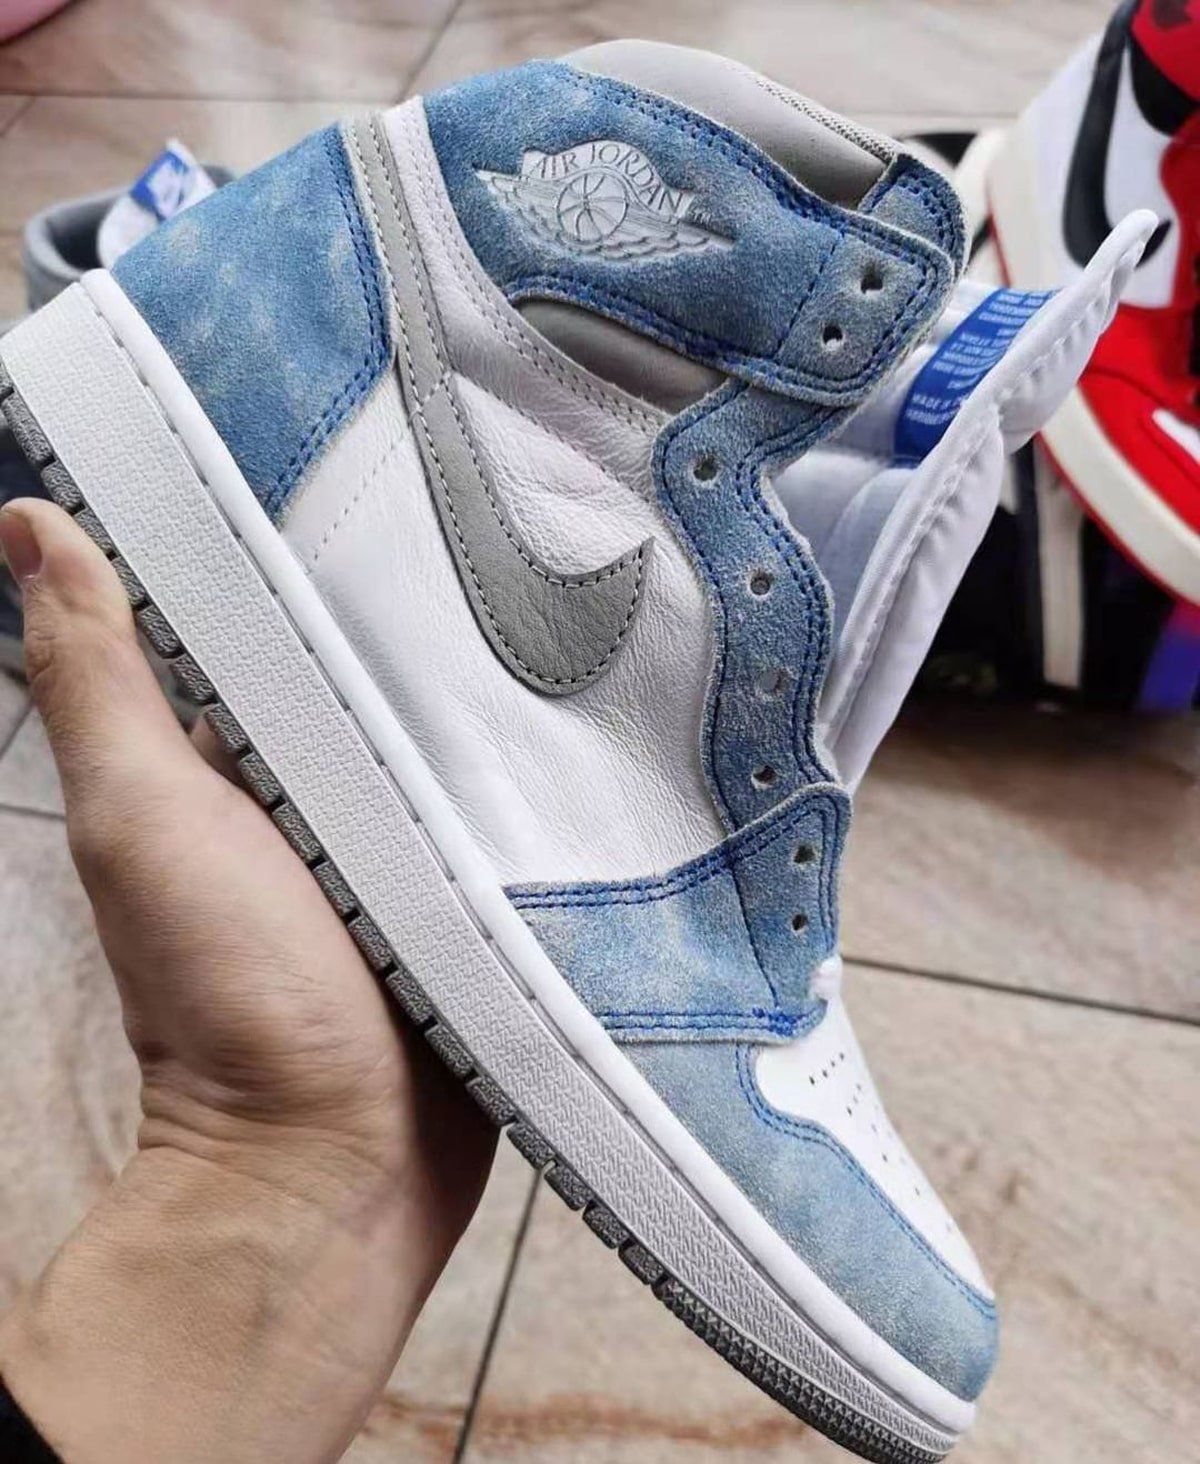 how to tell if jordan 1 hyper royals are fake